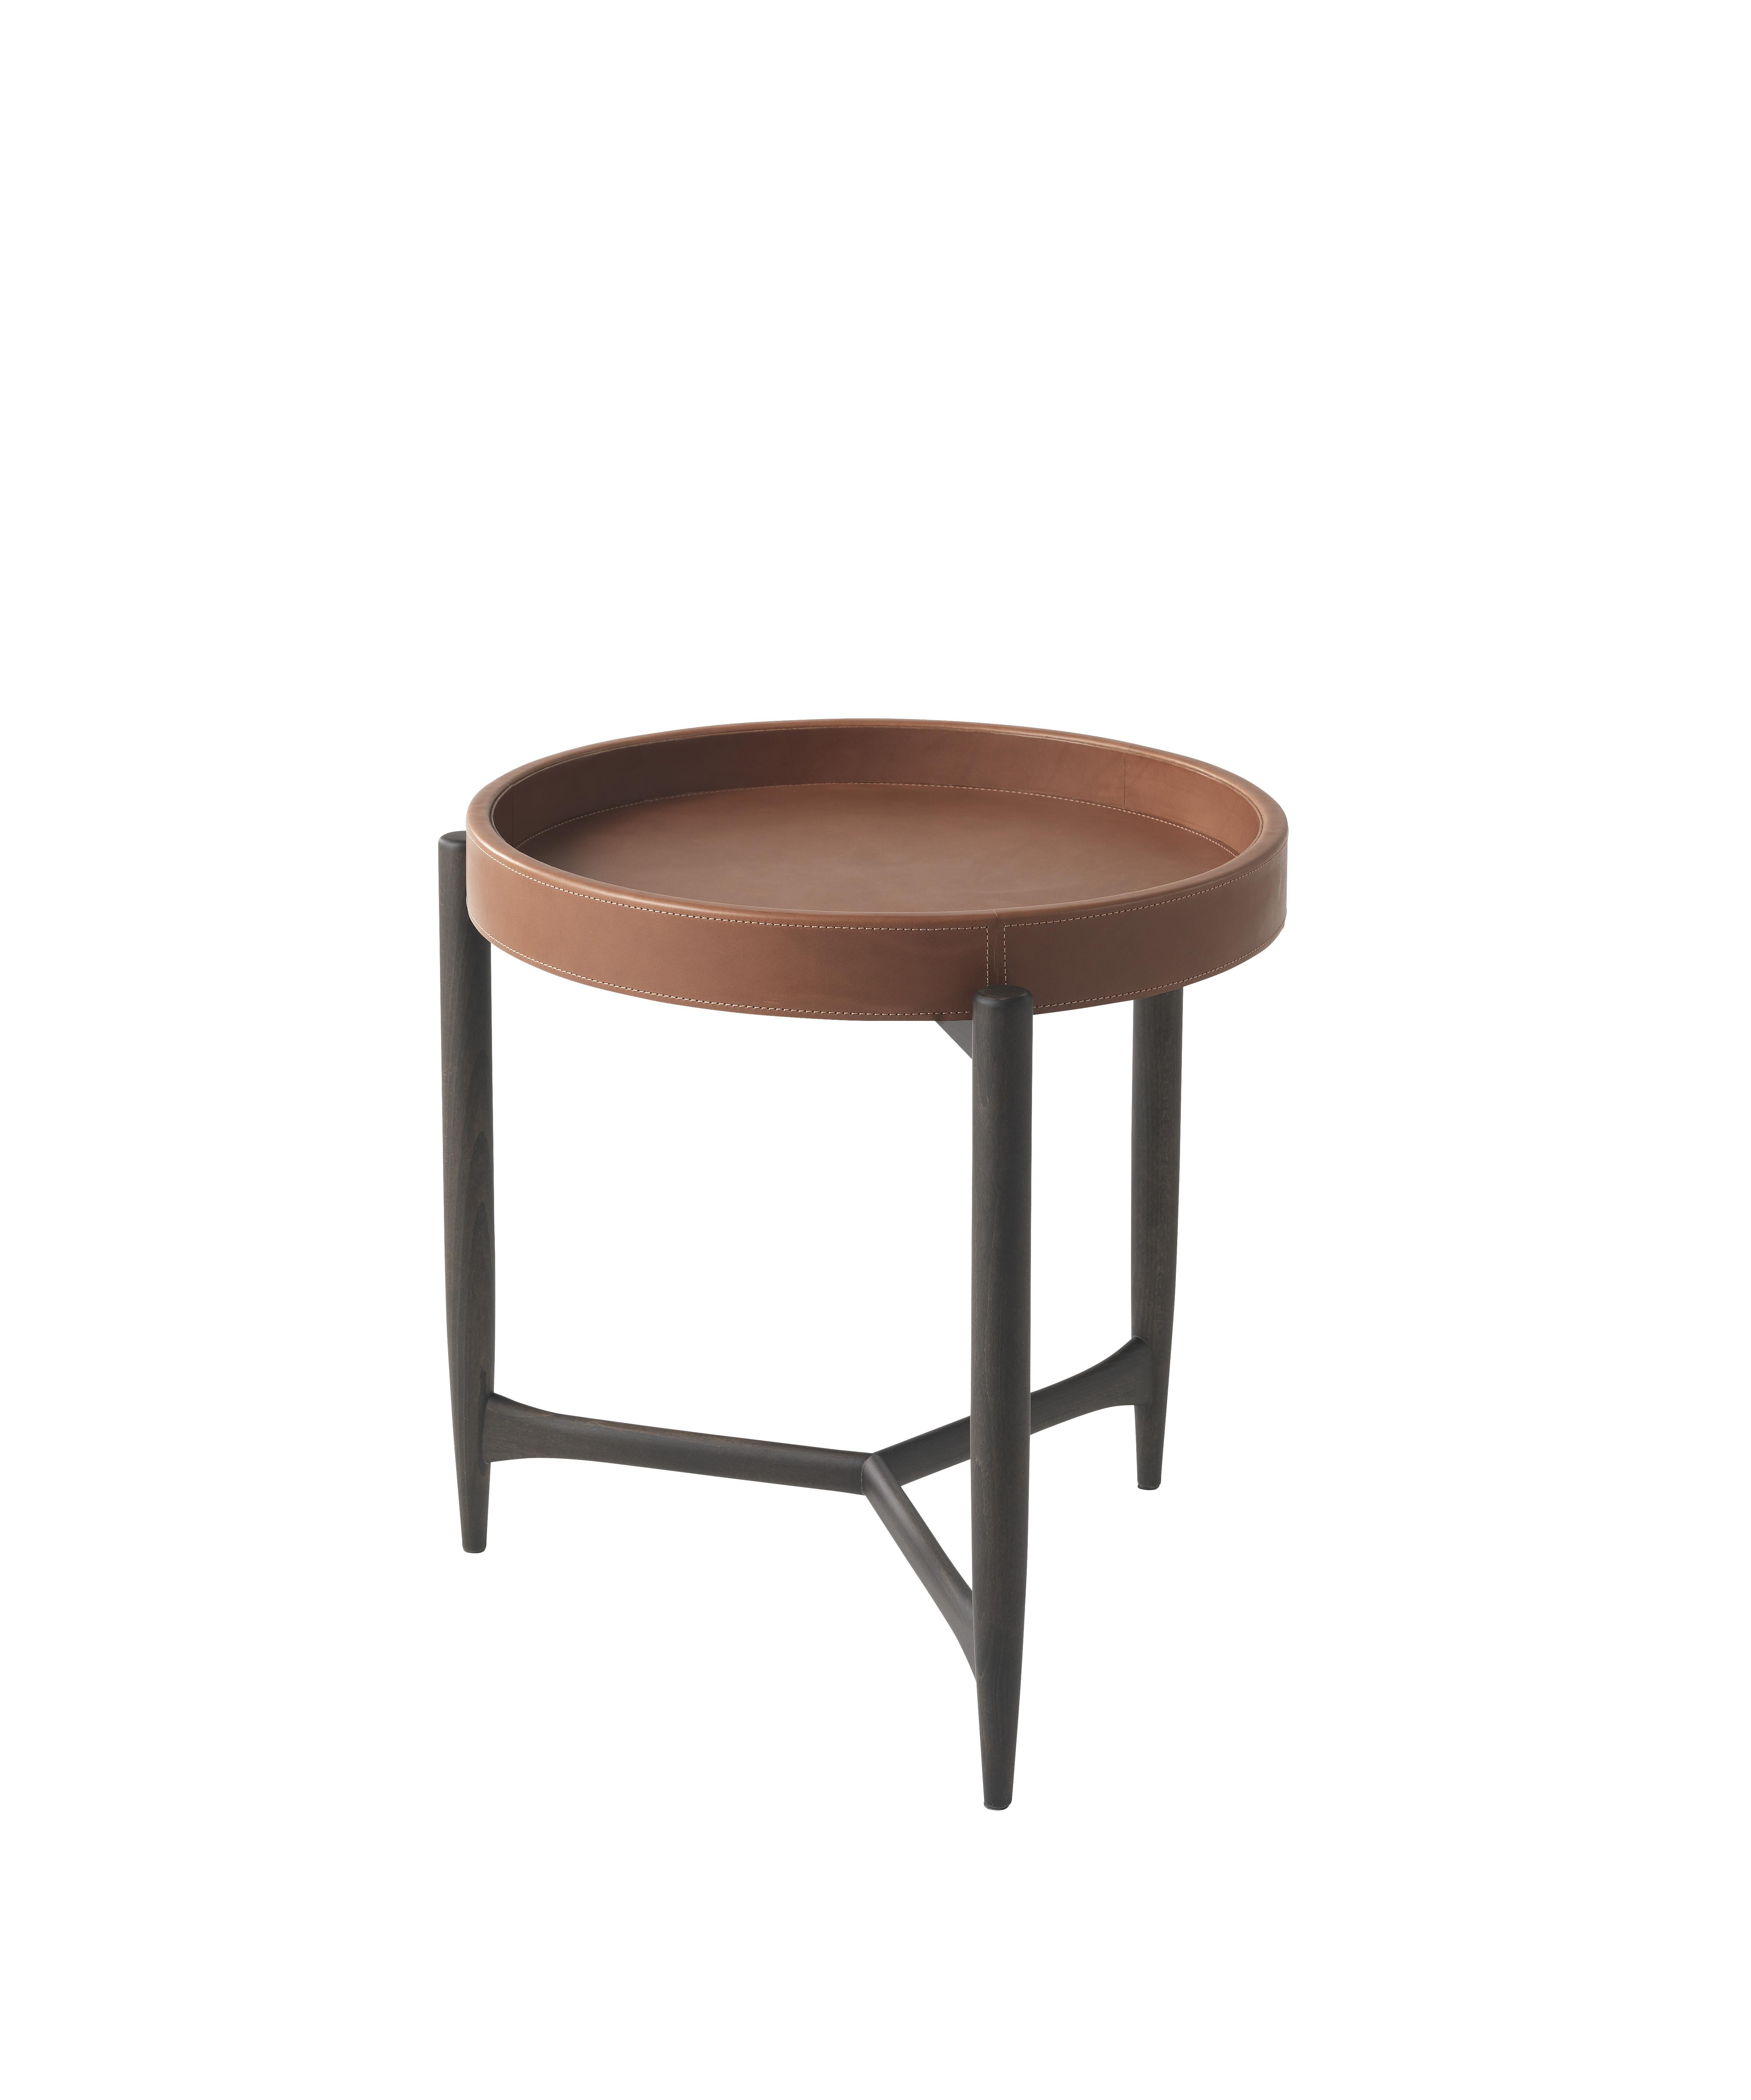 Essential lines and vintage charm for the Chambers round coffee table. The solid beech base pays homage to Nordic design and is combined with a top with saddle leather upholstery, lending a feeling of warmth and coziness.
Chambers side table with